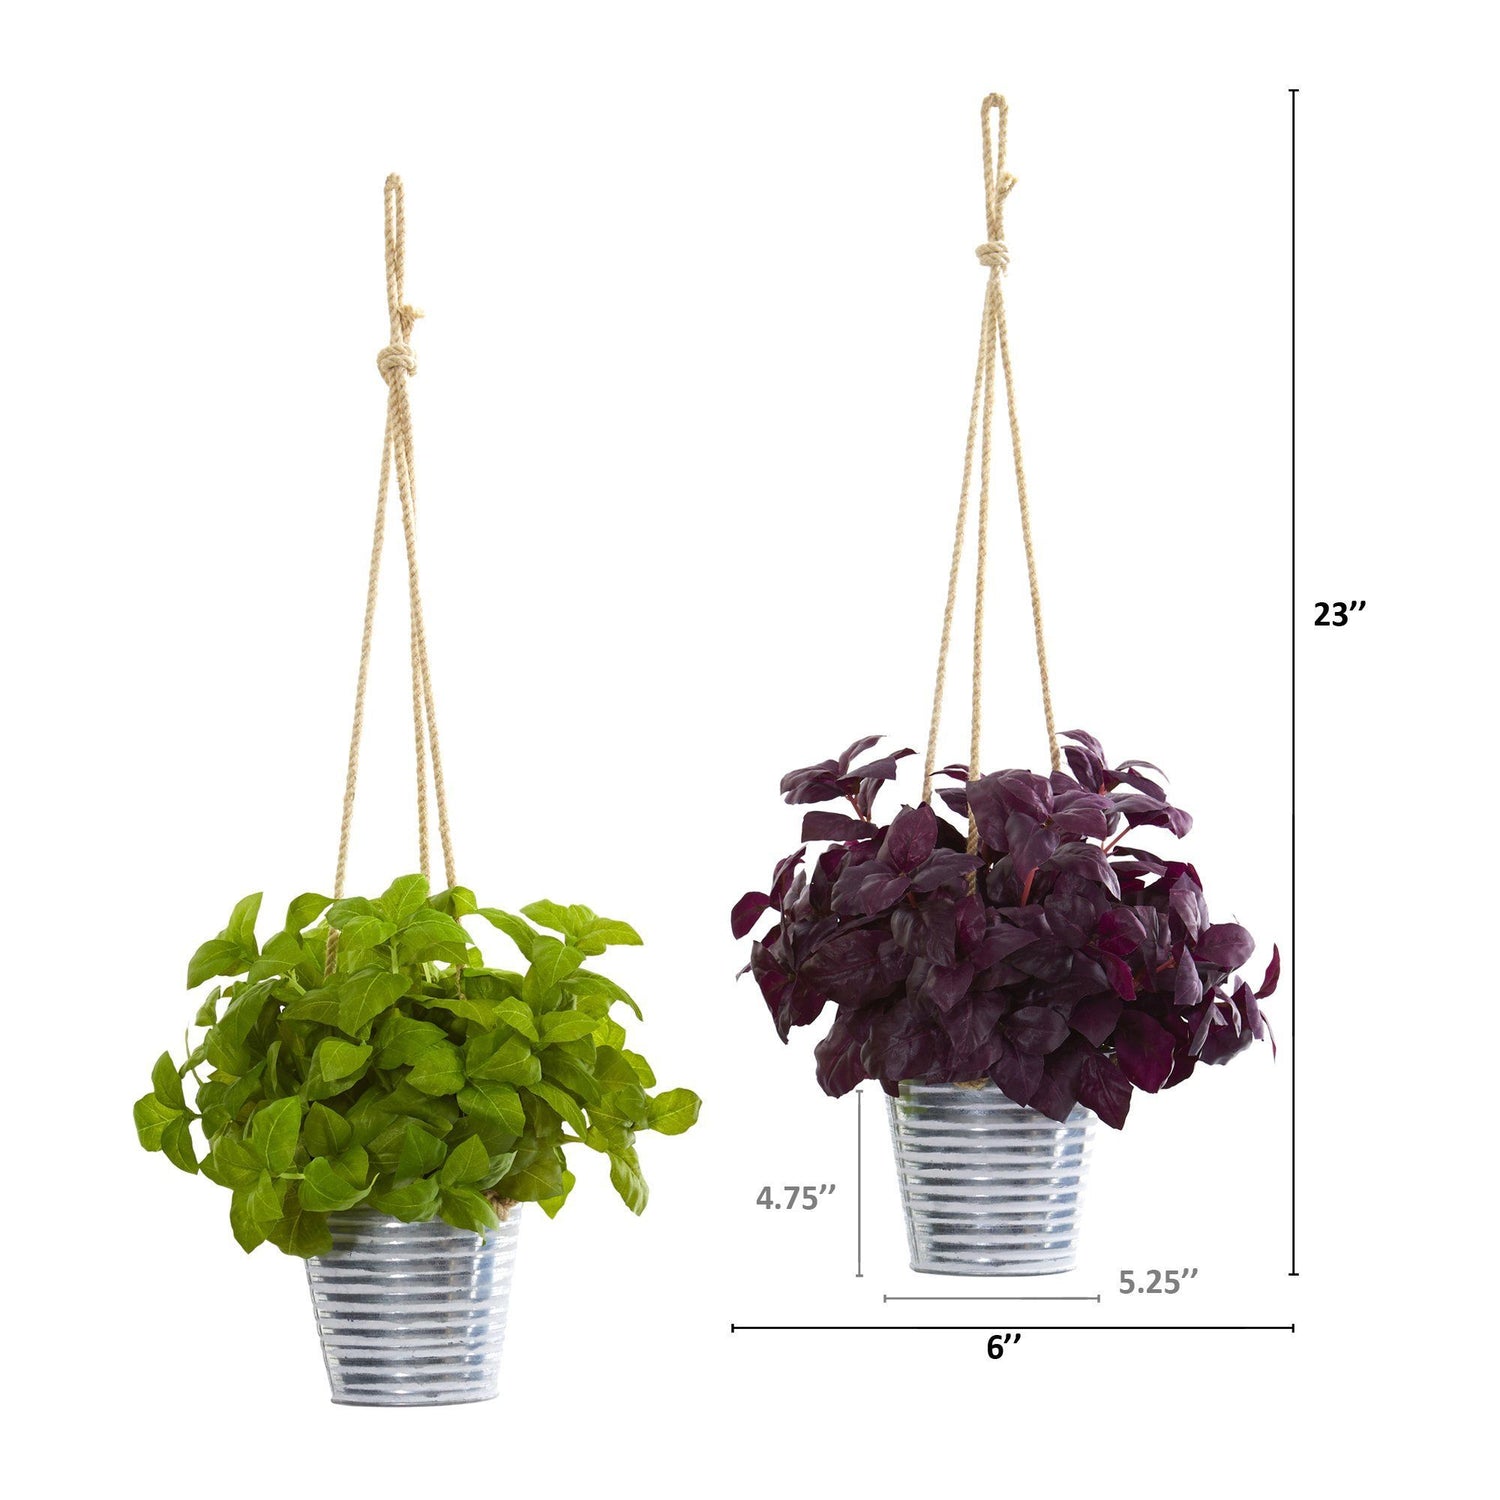 23” Basil Artificial Plant in Hanging Bucket (Set of 2)